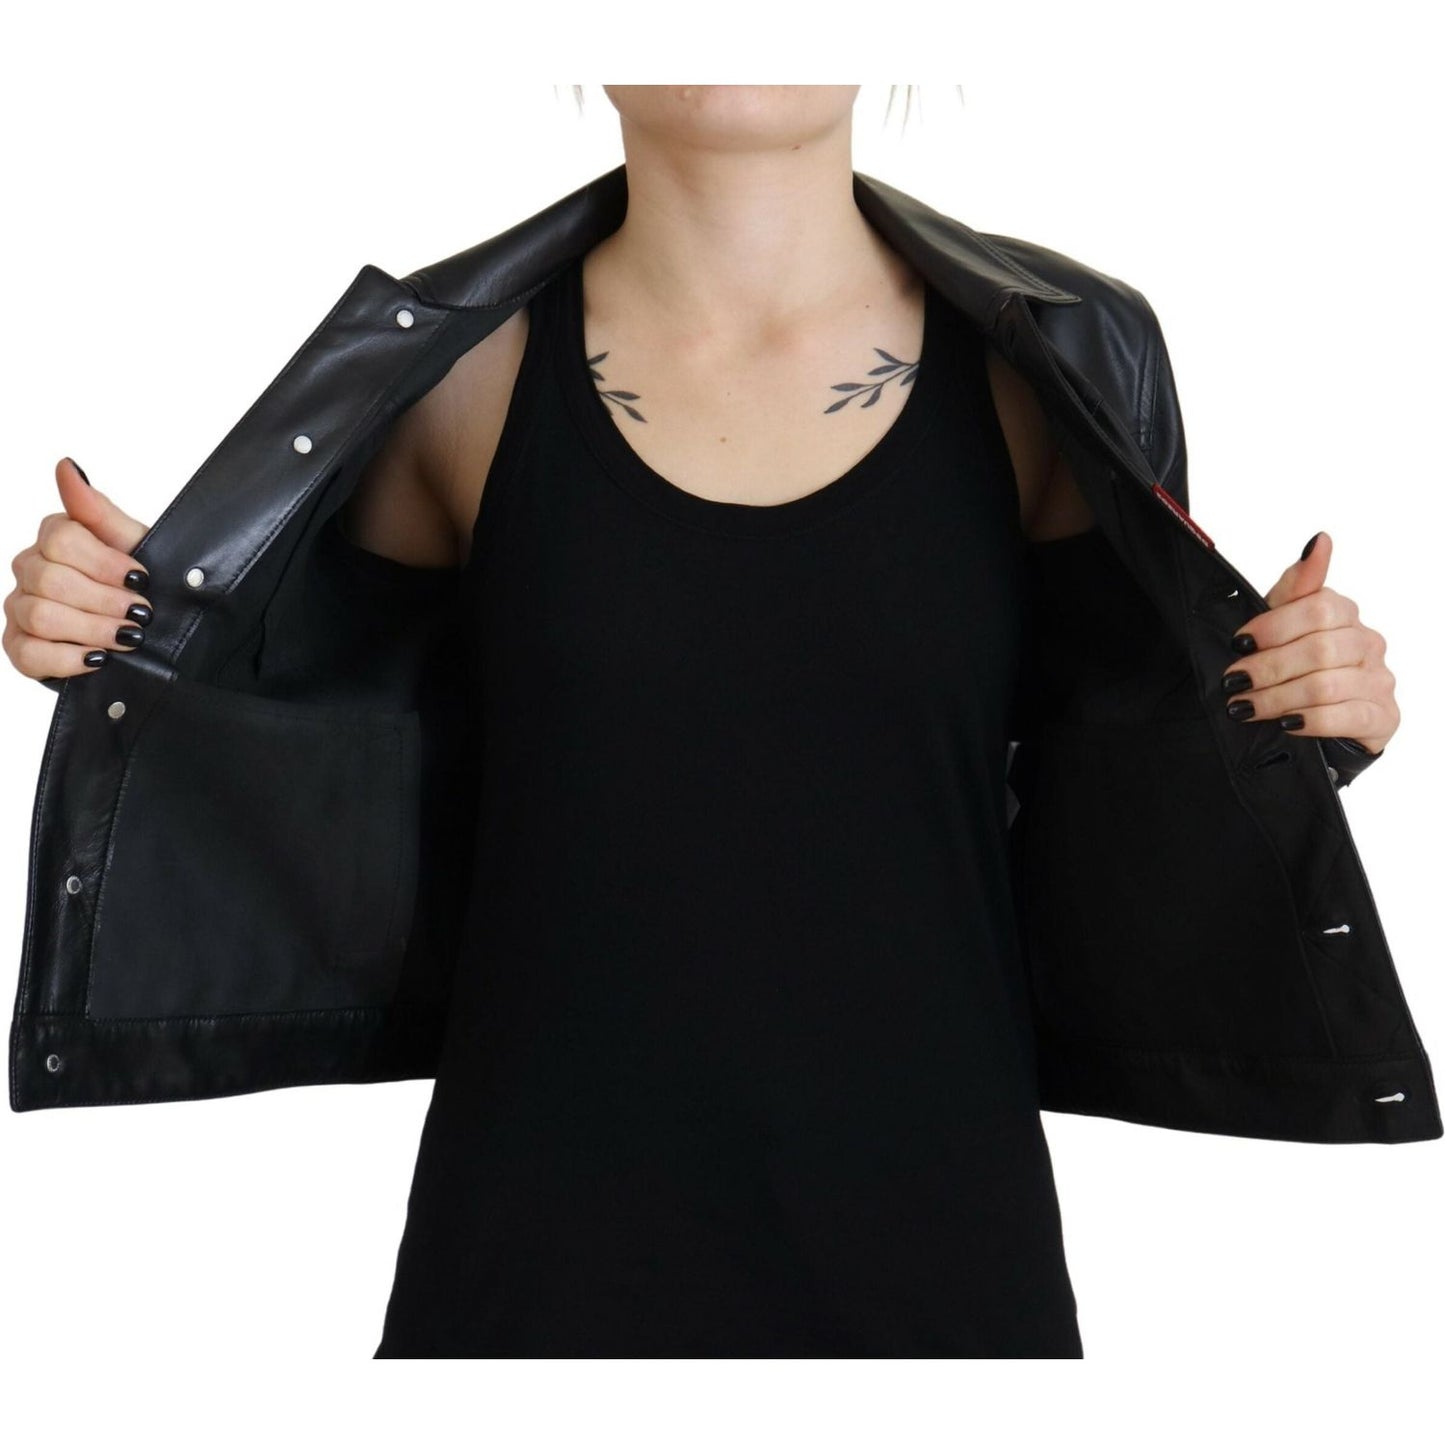 Dsquared² Black Leather Collared Long Sleeves Jacket black-leather-collared-long-sleeves-jacket